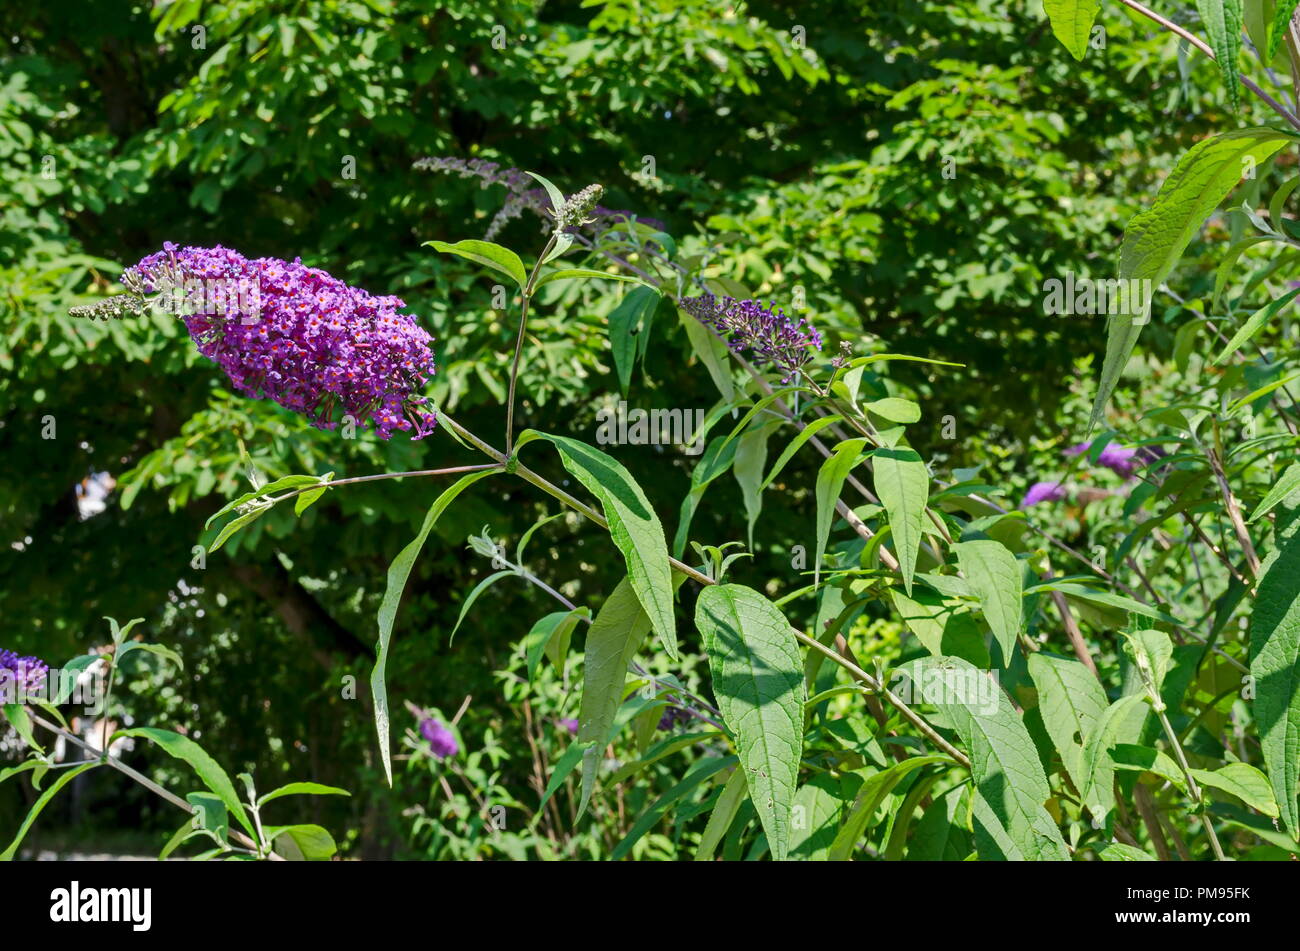 Buddleia davidii, Violet Lilac or Butterfly Bush blooming on a green background, Sofia, Bulgaria Stock Photo